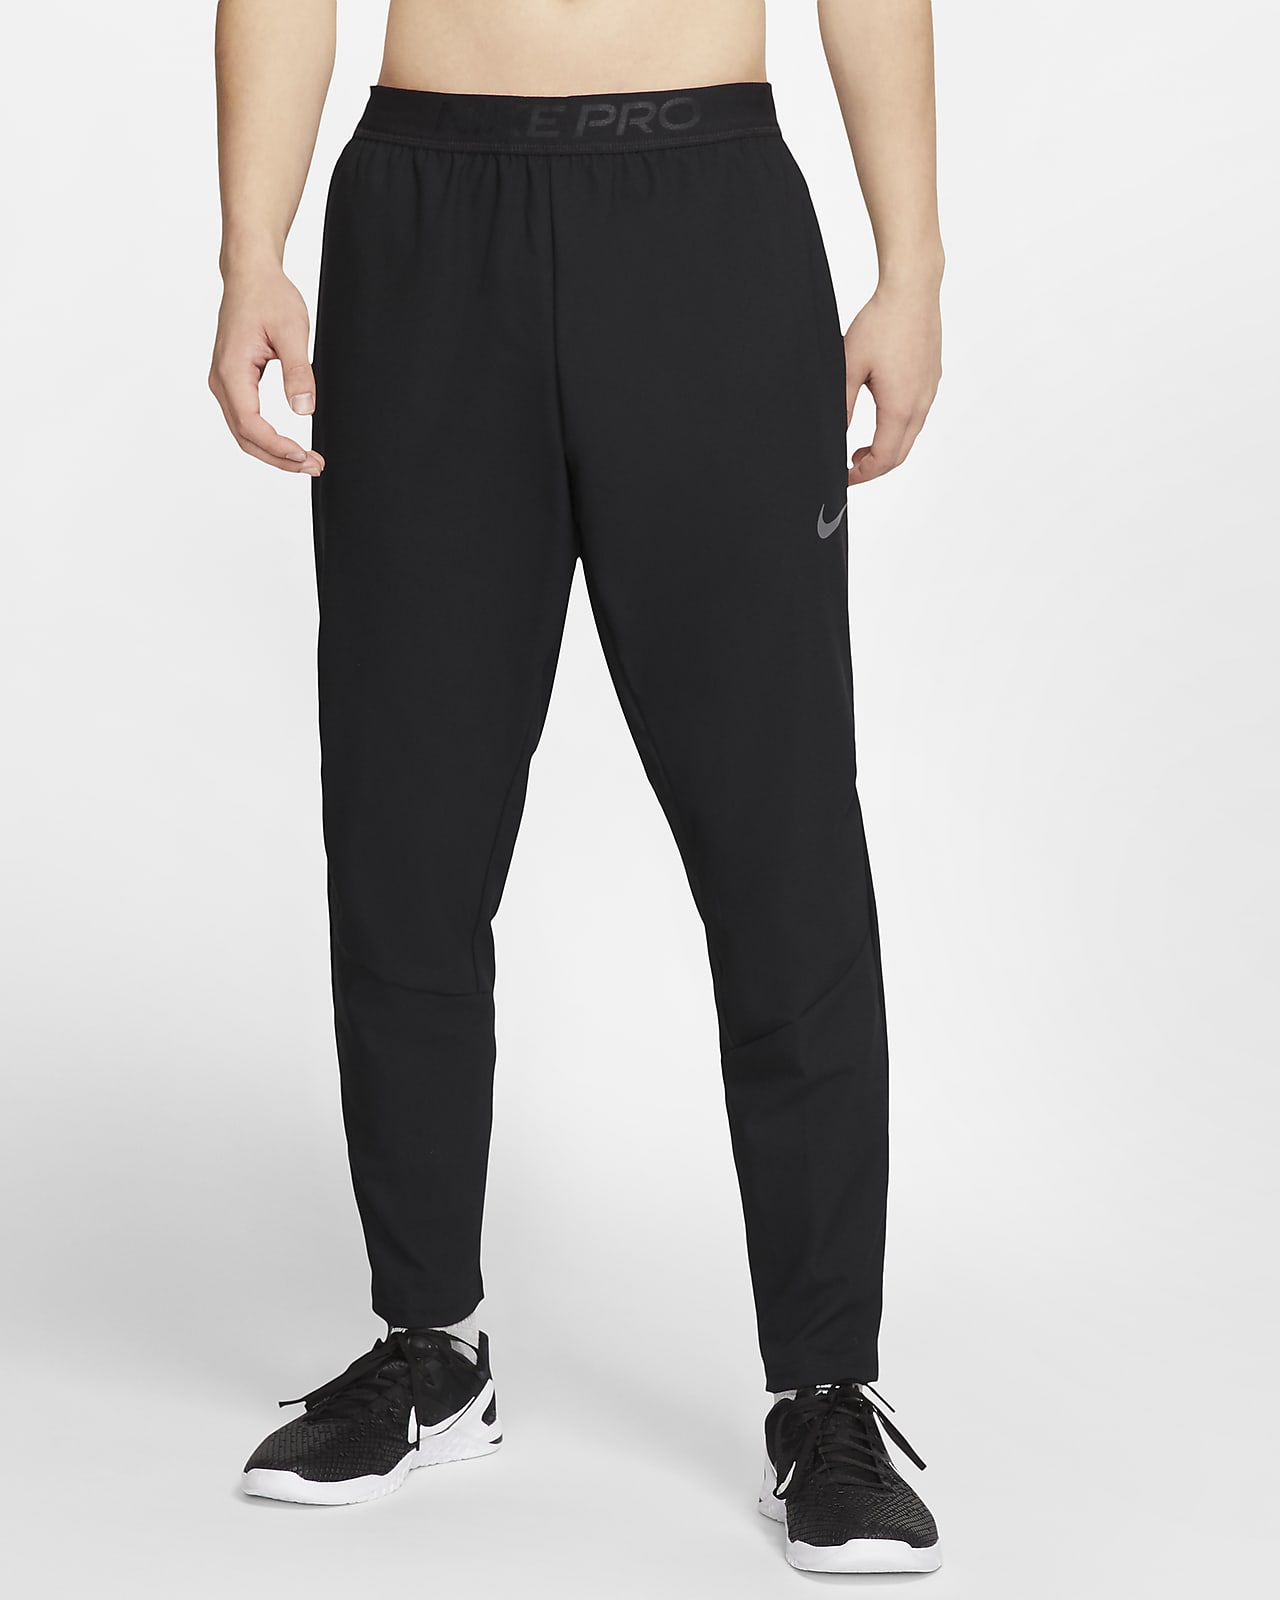 Mens Trousers and Leggings  Ascent Fashion